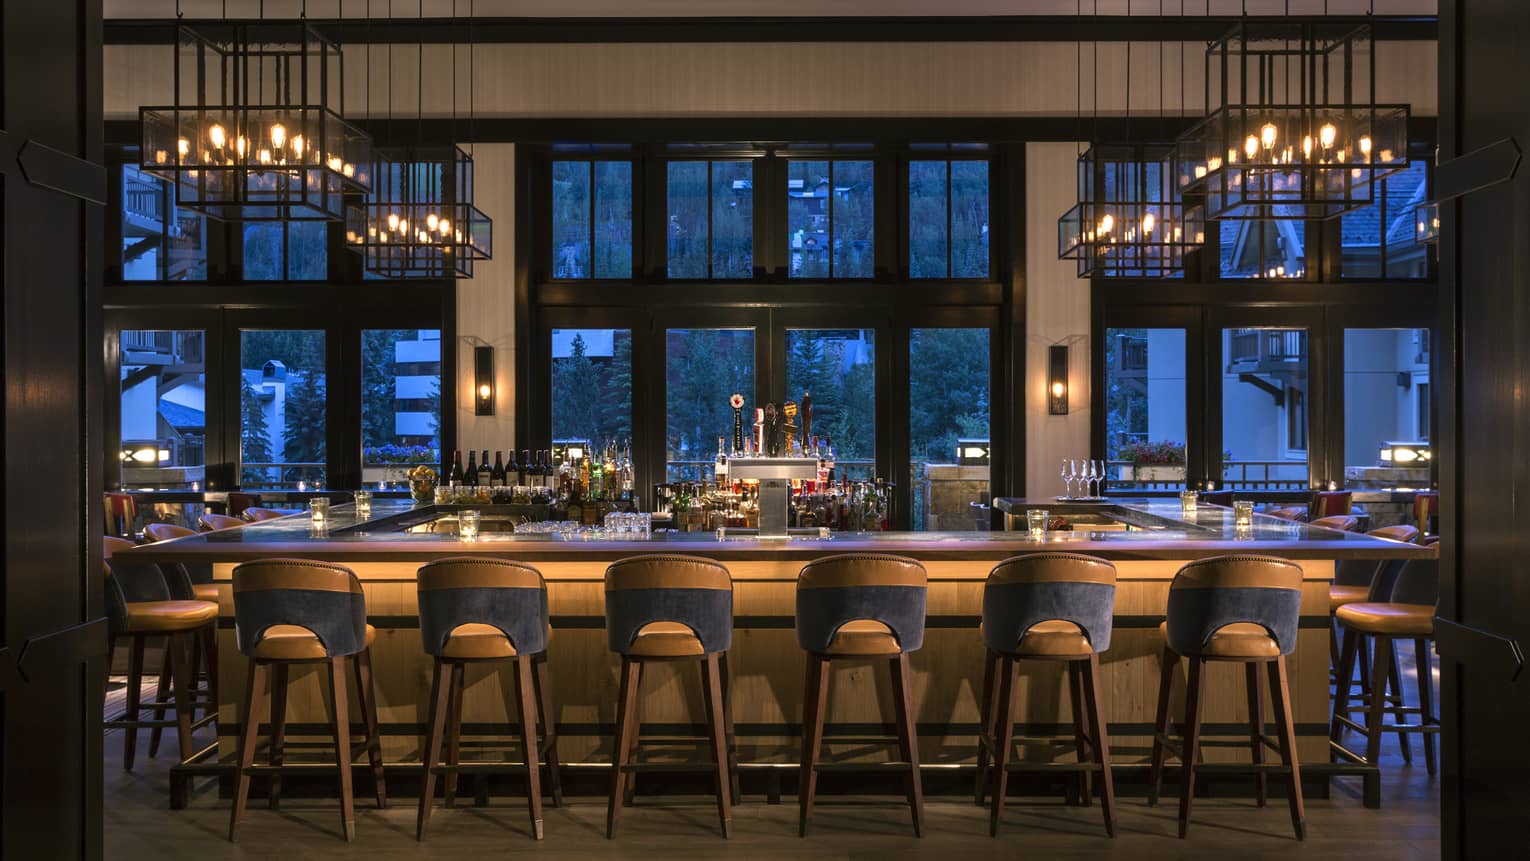 Dimly-lit bar at dusk lined with retro-style wood stools, lantern chandeliers above, large windows